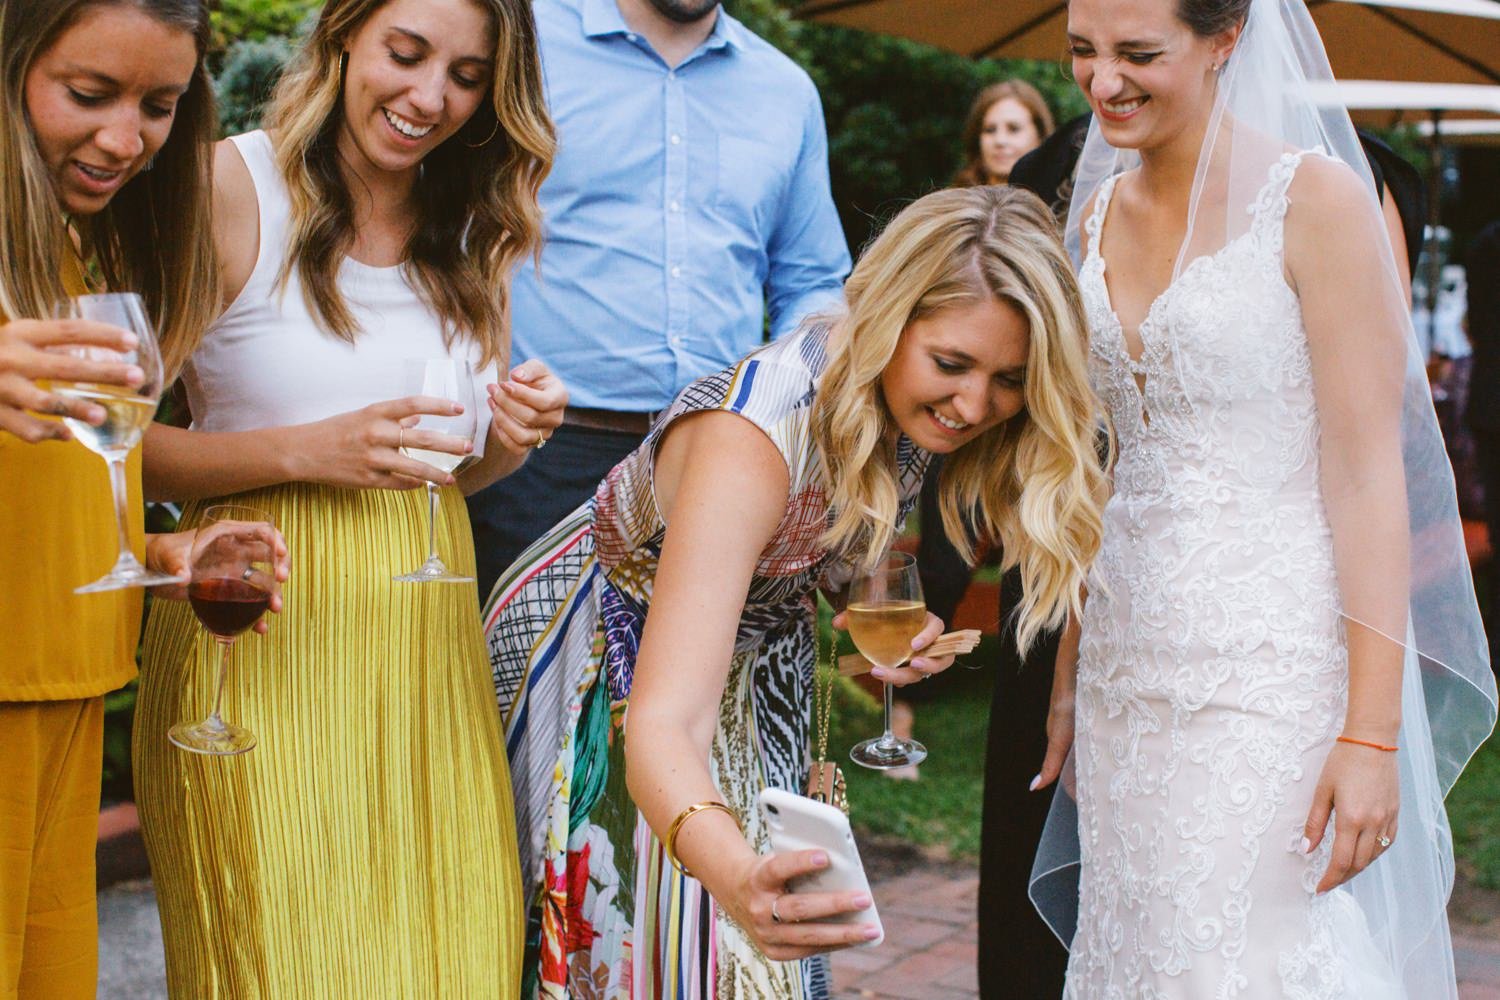  woman holding wine glass and cell phone takes photo while surrounded by women smiling and laughing 